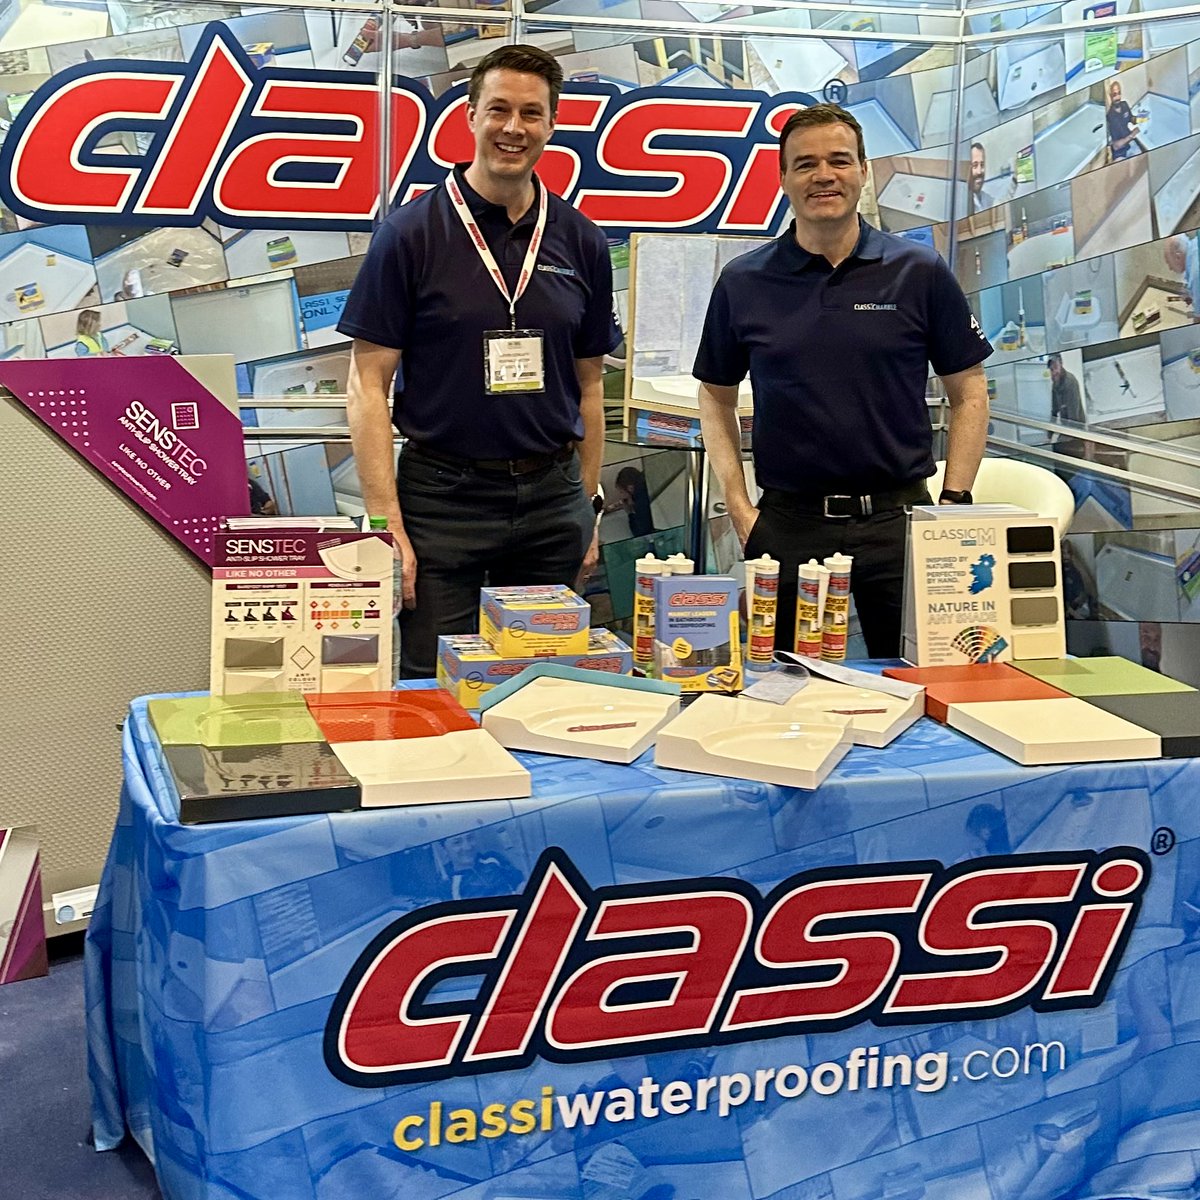 How many SENSTEC colours can you see in this image? 🎨 

Guesses in the comments.

We are at the @NMBS show, at booth 356 with @Classi, showing off our anti-slip trays. Come say hi! 👋